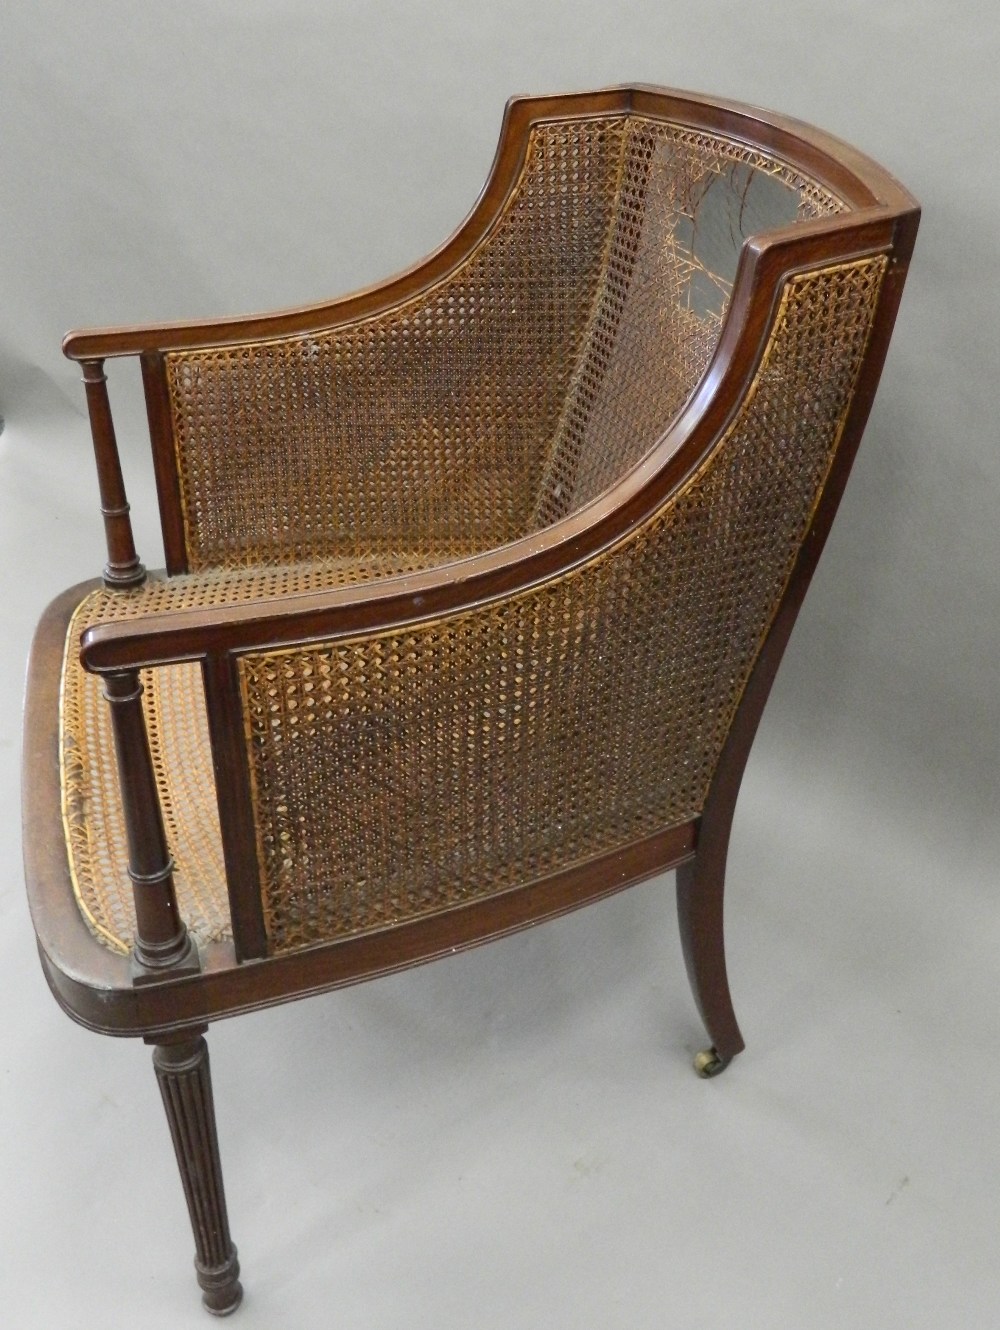 An early 20th century mahogany framed bergere chair - Image 3 of 4